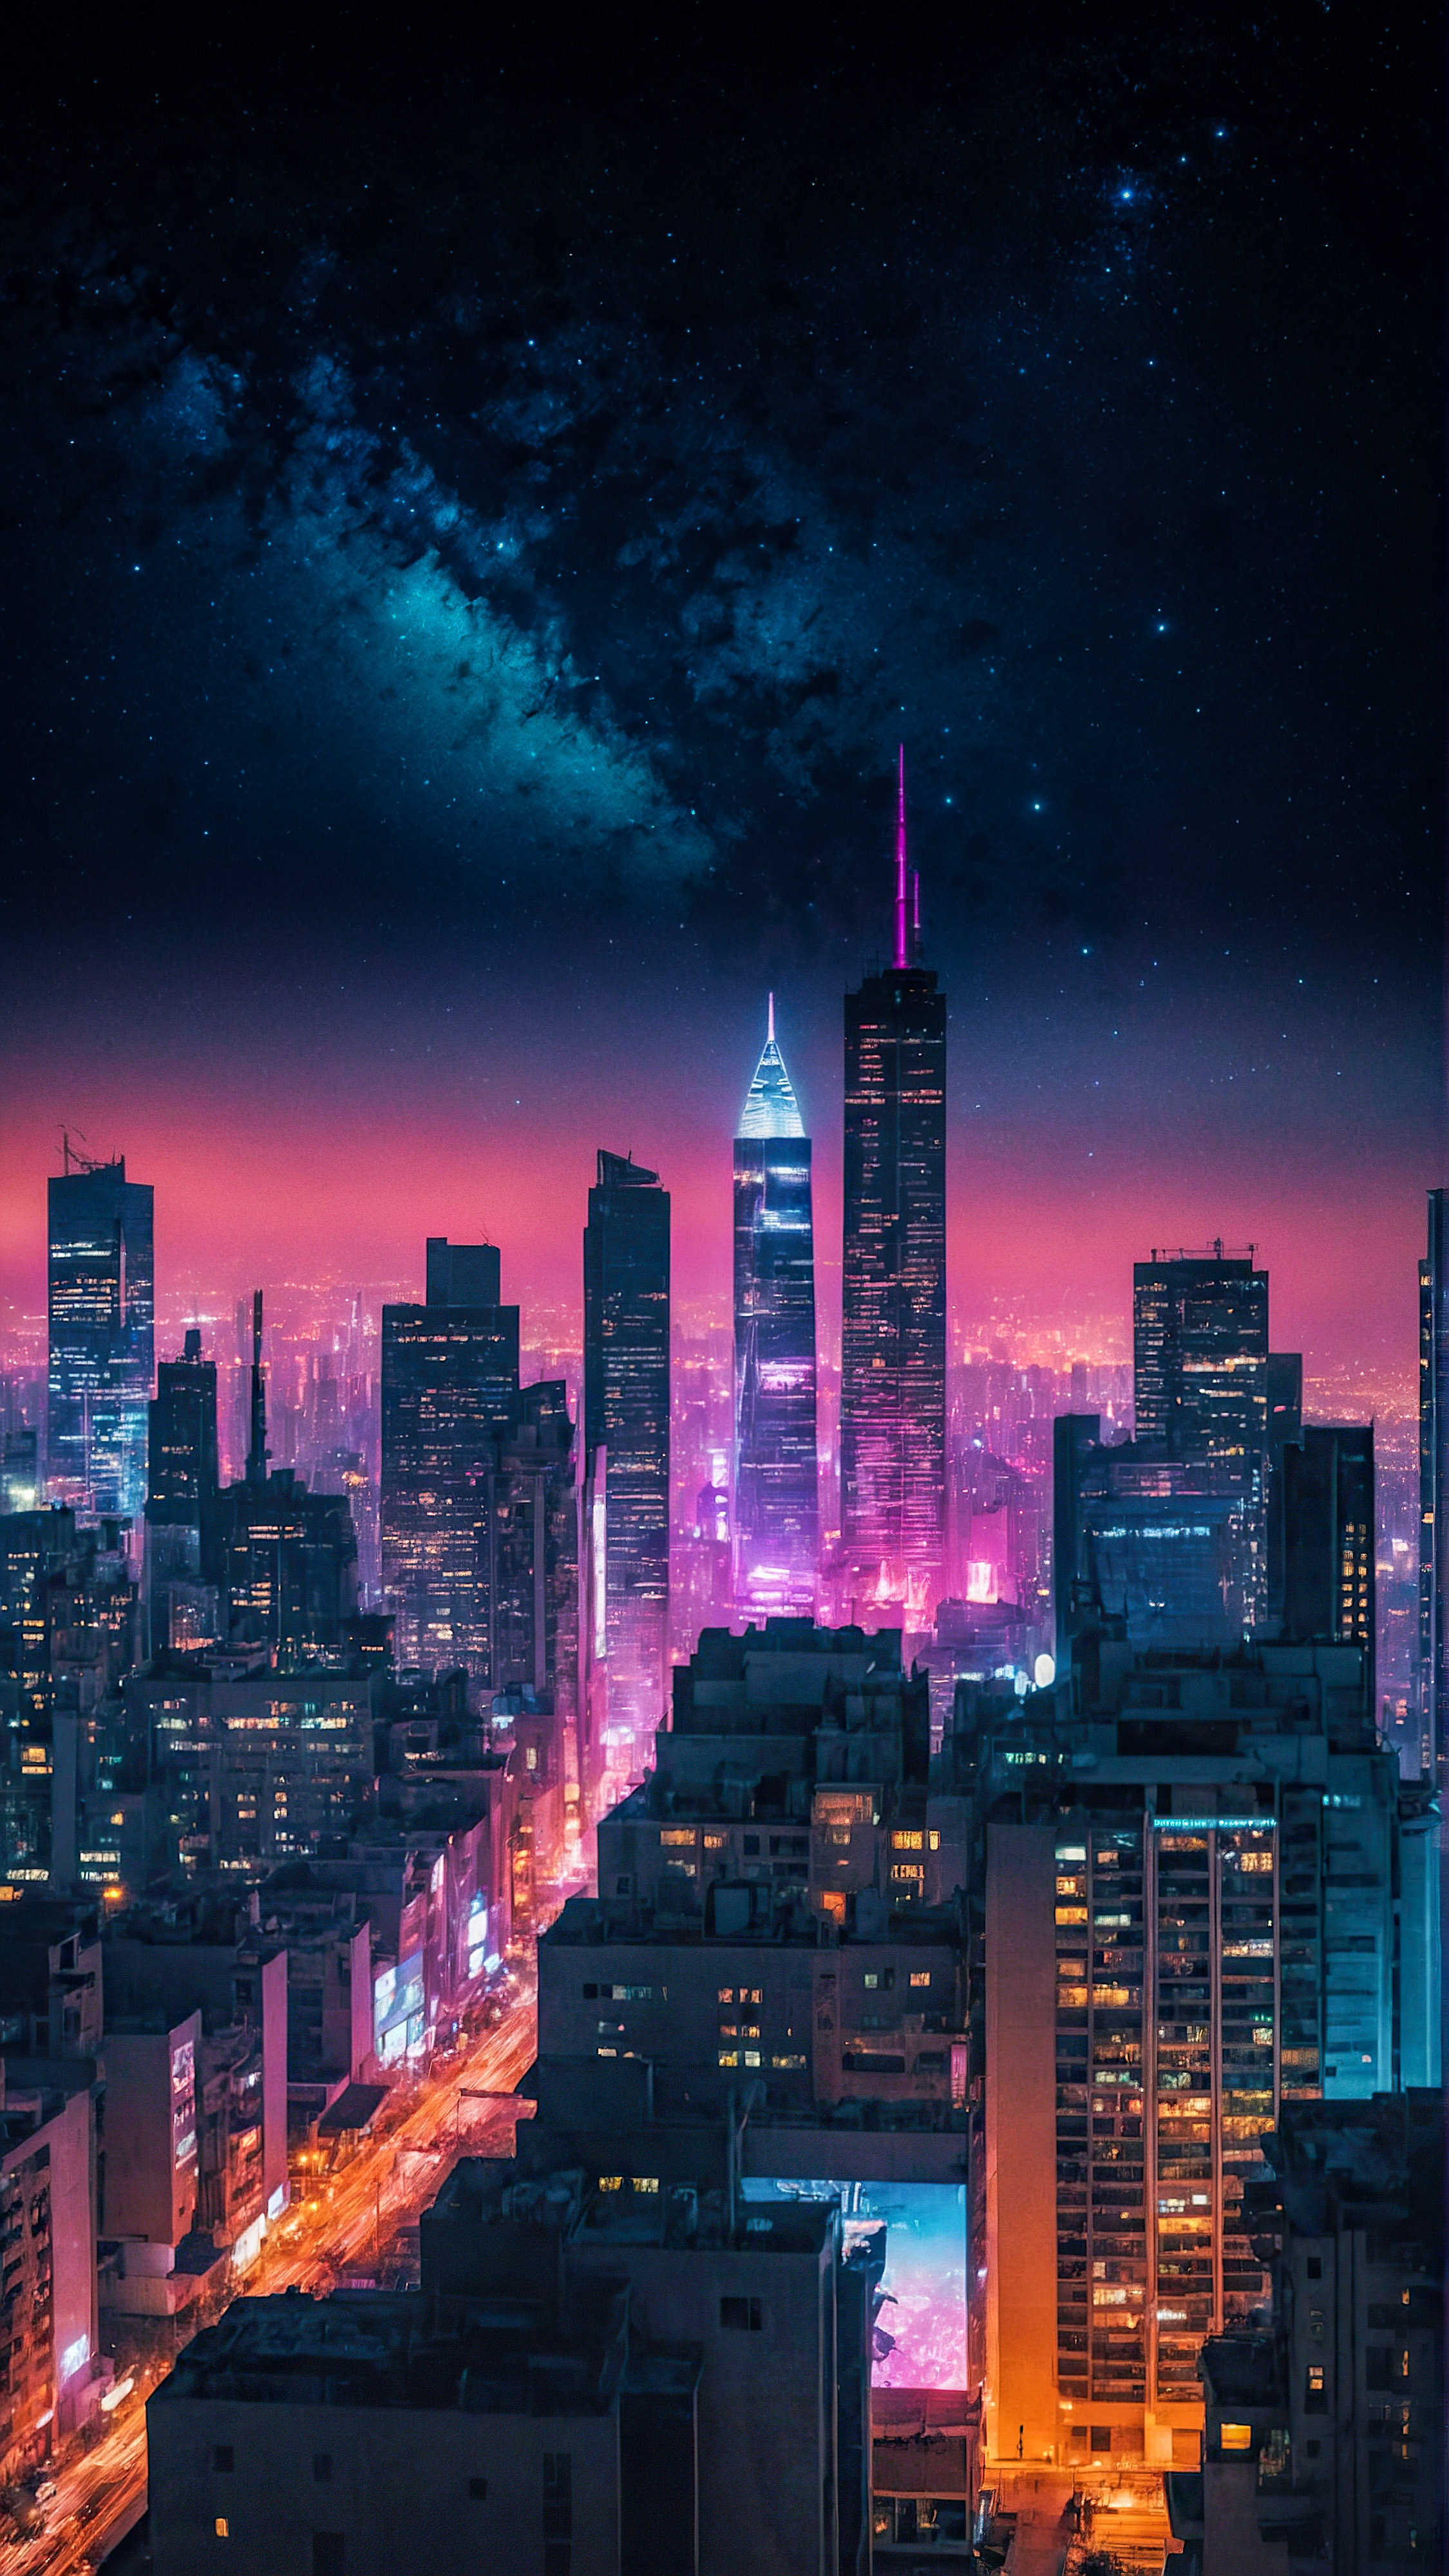 Transform your device’s appearance with our cool iPhone home screen backgrounds, featuring a futuristic cityscape illuminated by neon lights under a starry night sky.